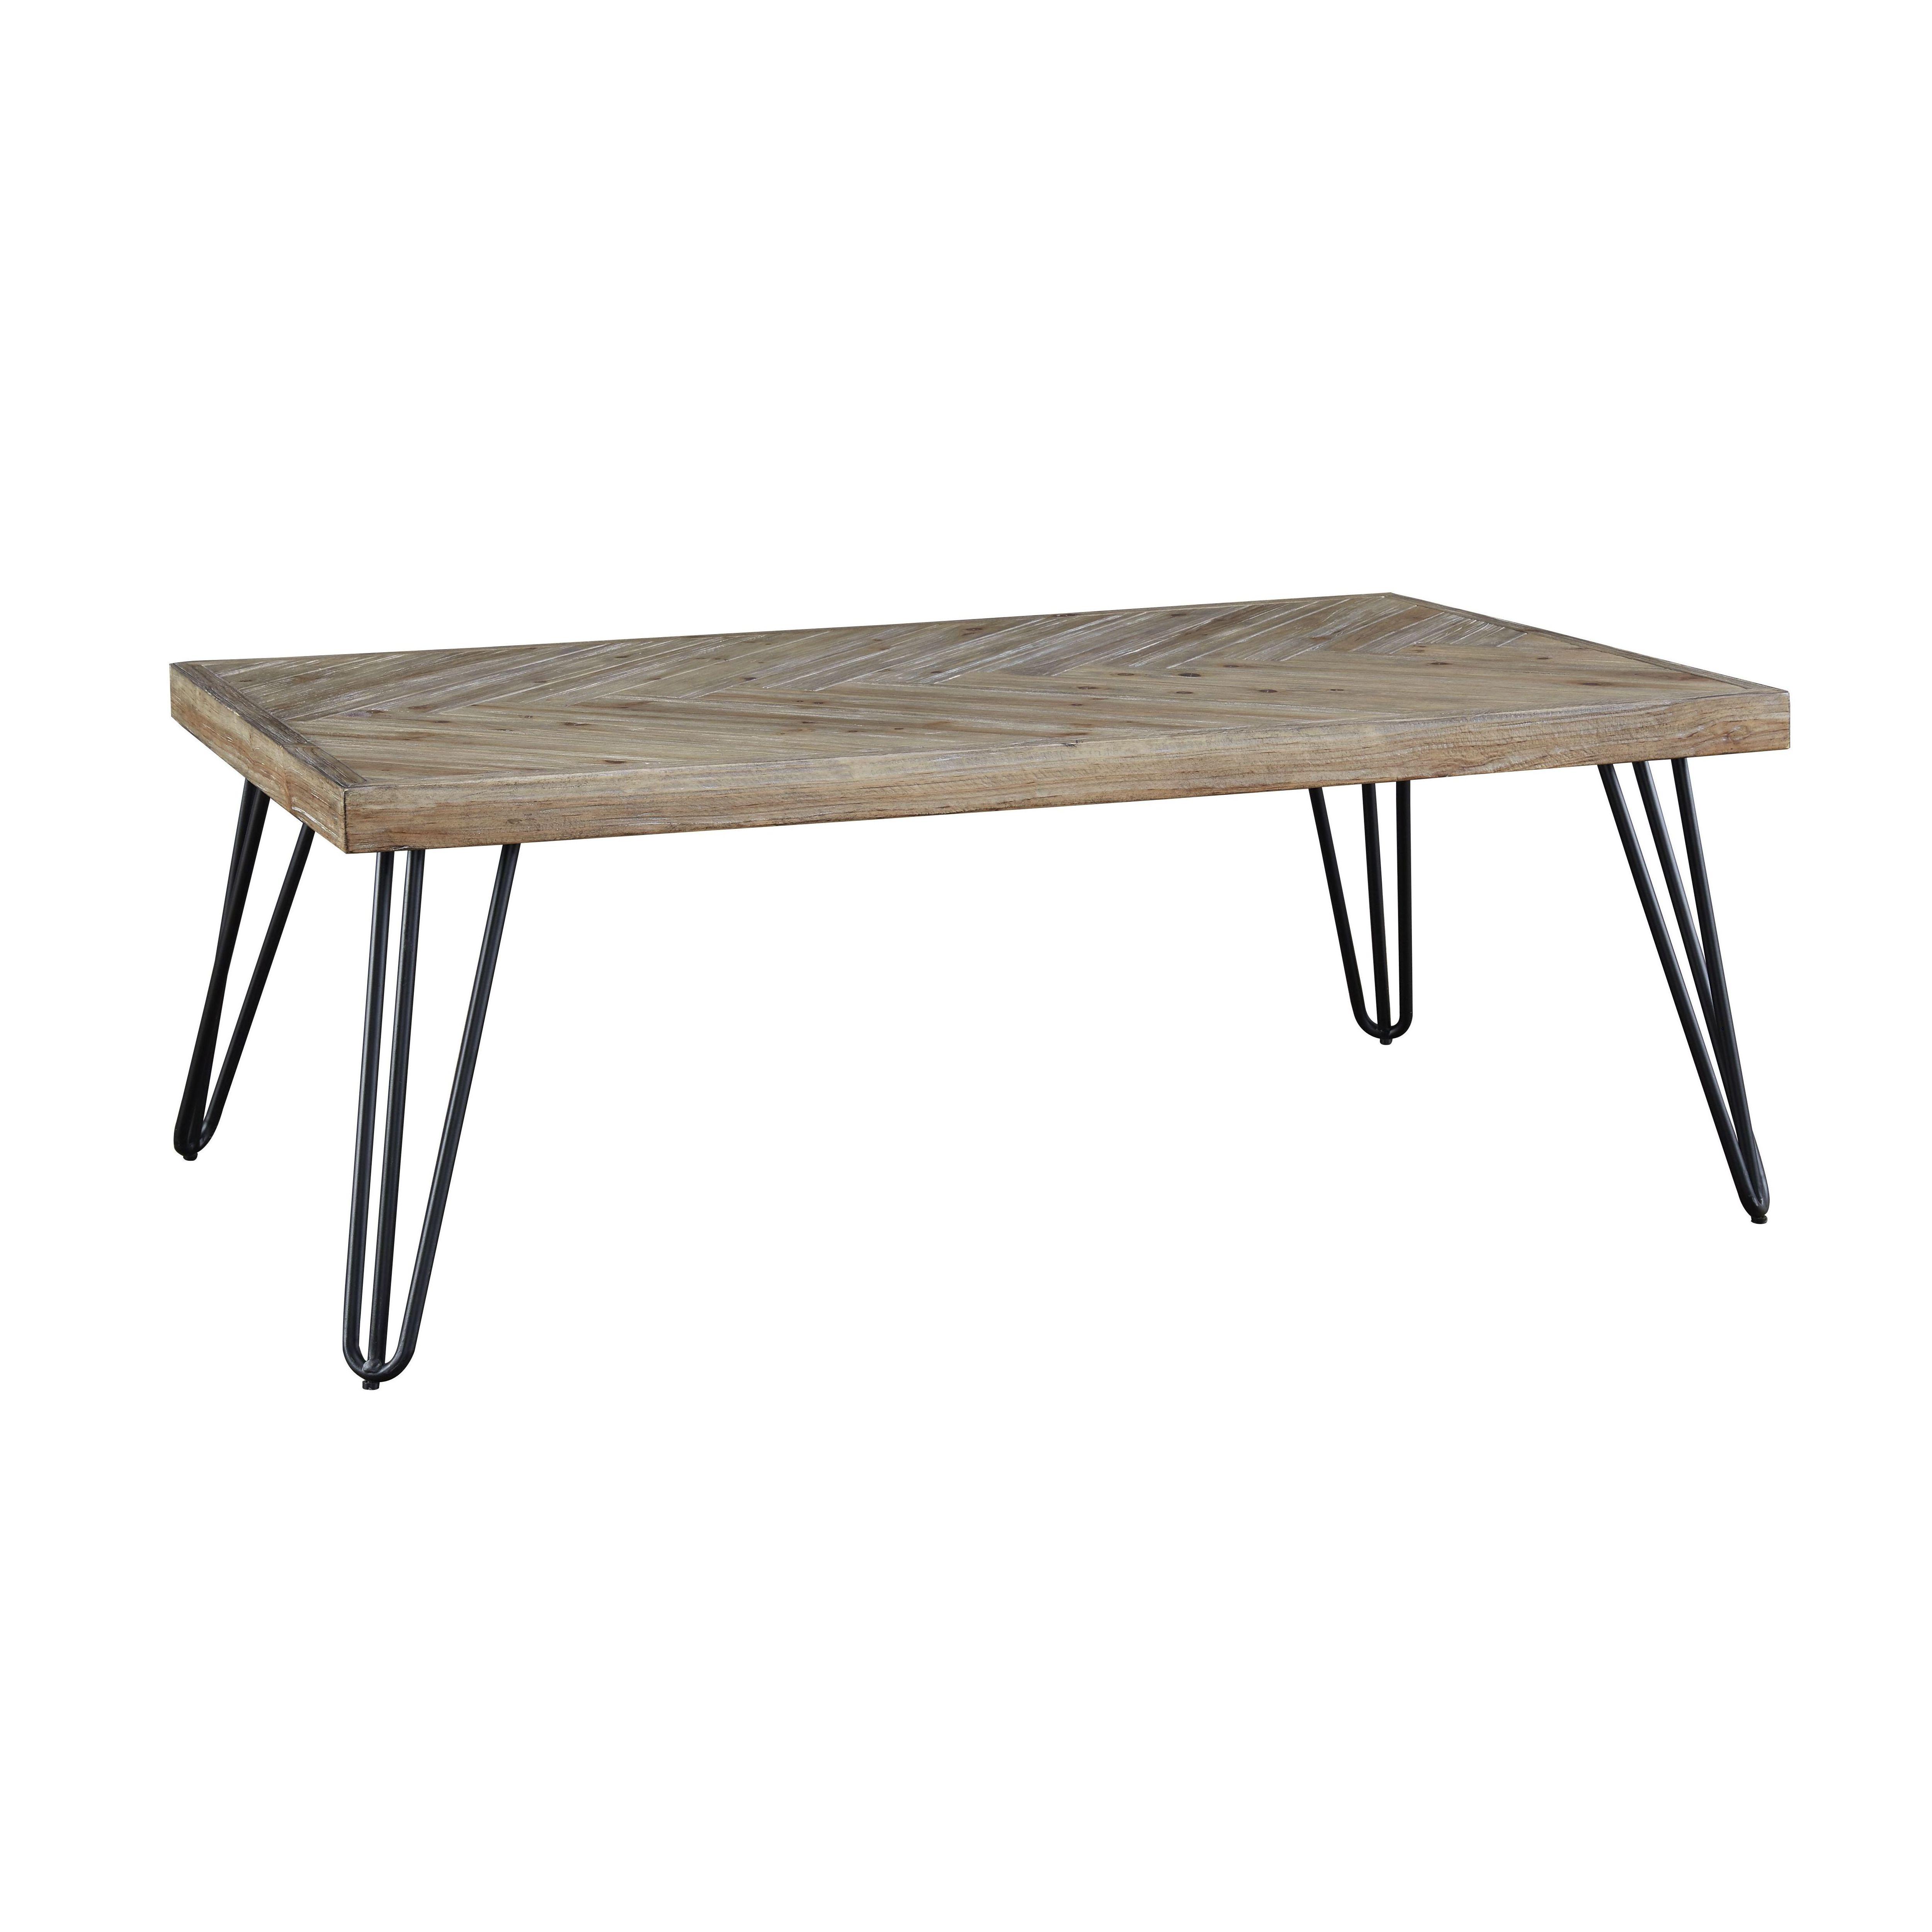 Modern Coffee Table EVERSON DVV121 in Sand 